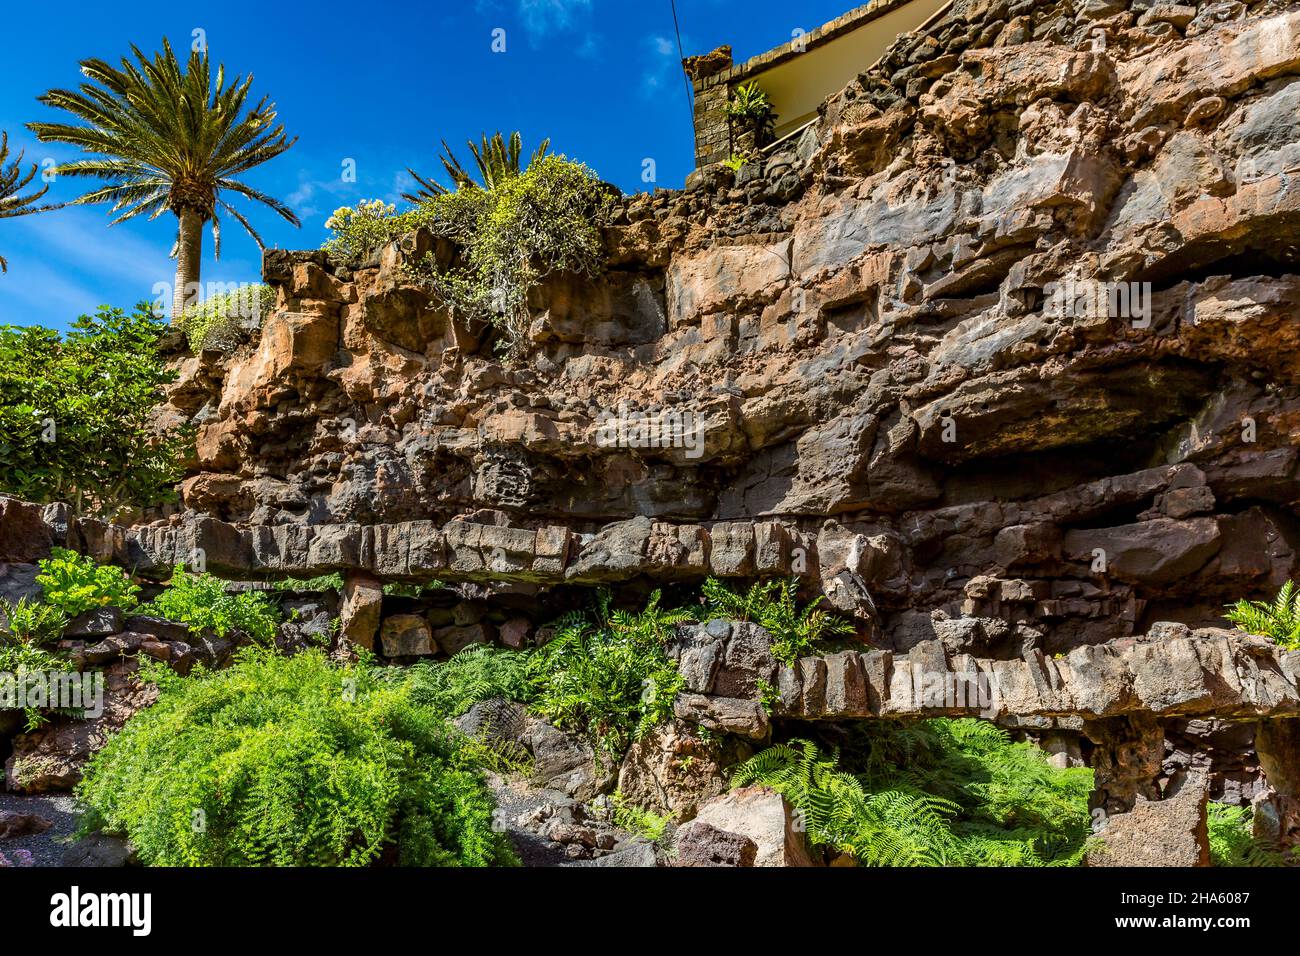 volcanic wall,grotto in the lava field of monte corona,art and cultural site,built and designed by césar manrique,spanish artist from lanzarote,1919-1992,jameos del agua,lanzarote,canaries,canary islands,spain,europe Stock Photo